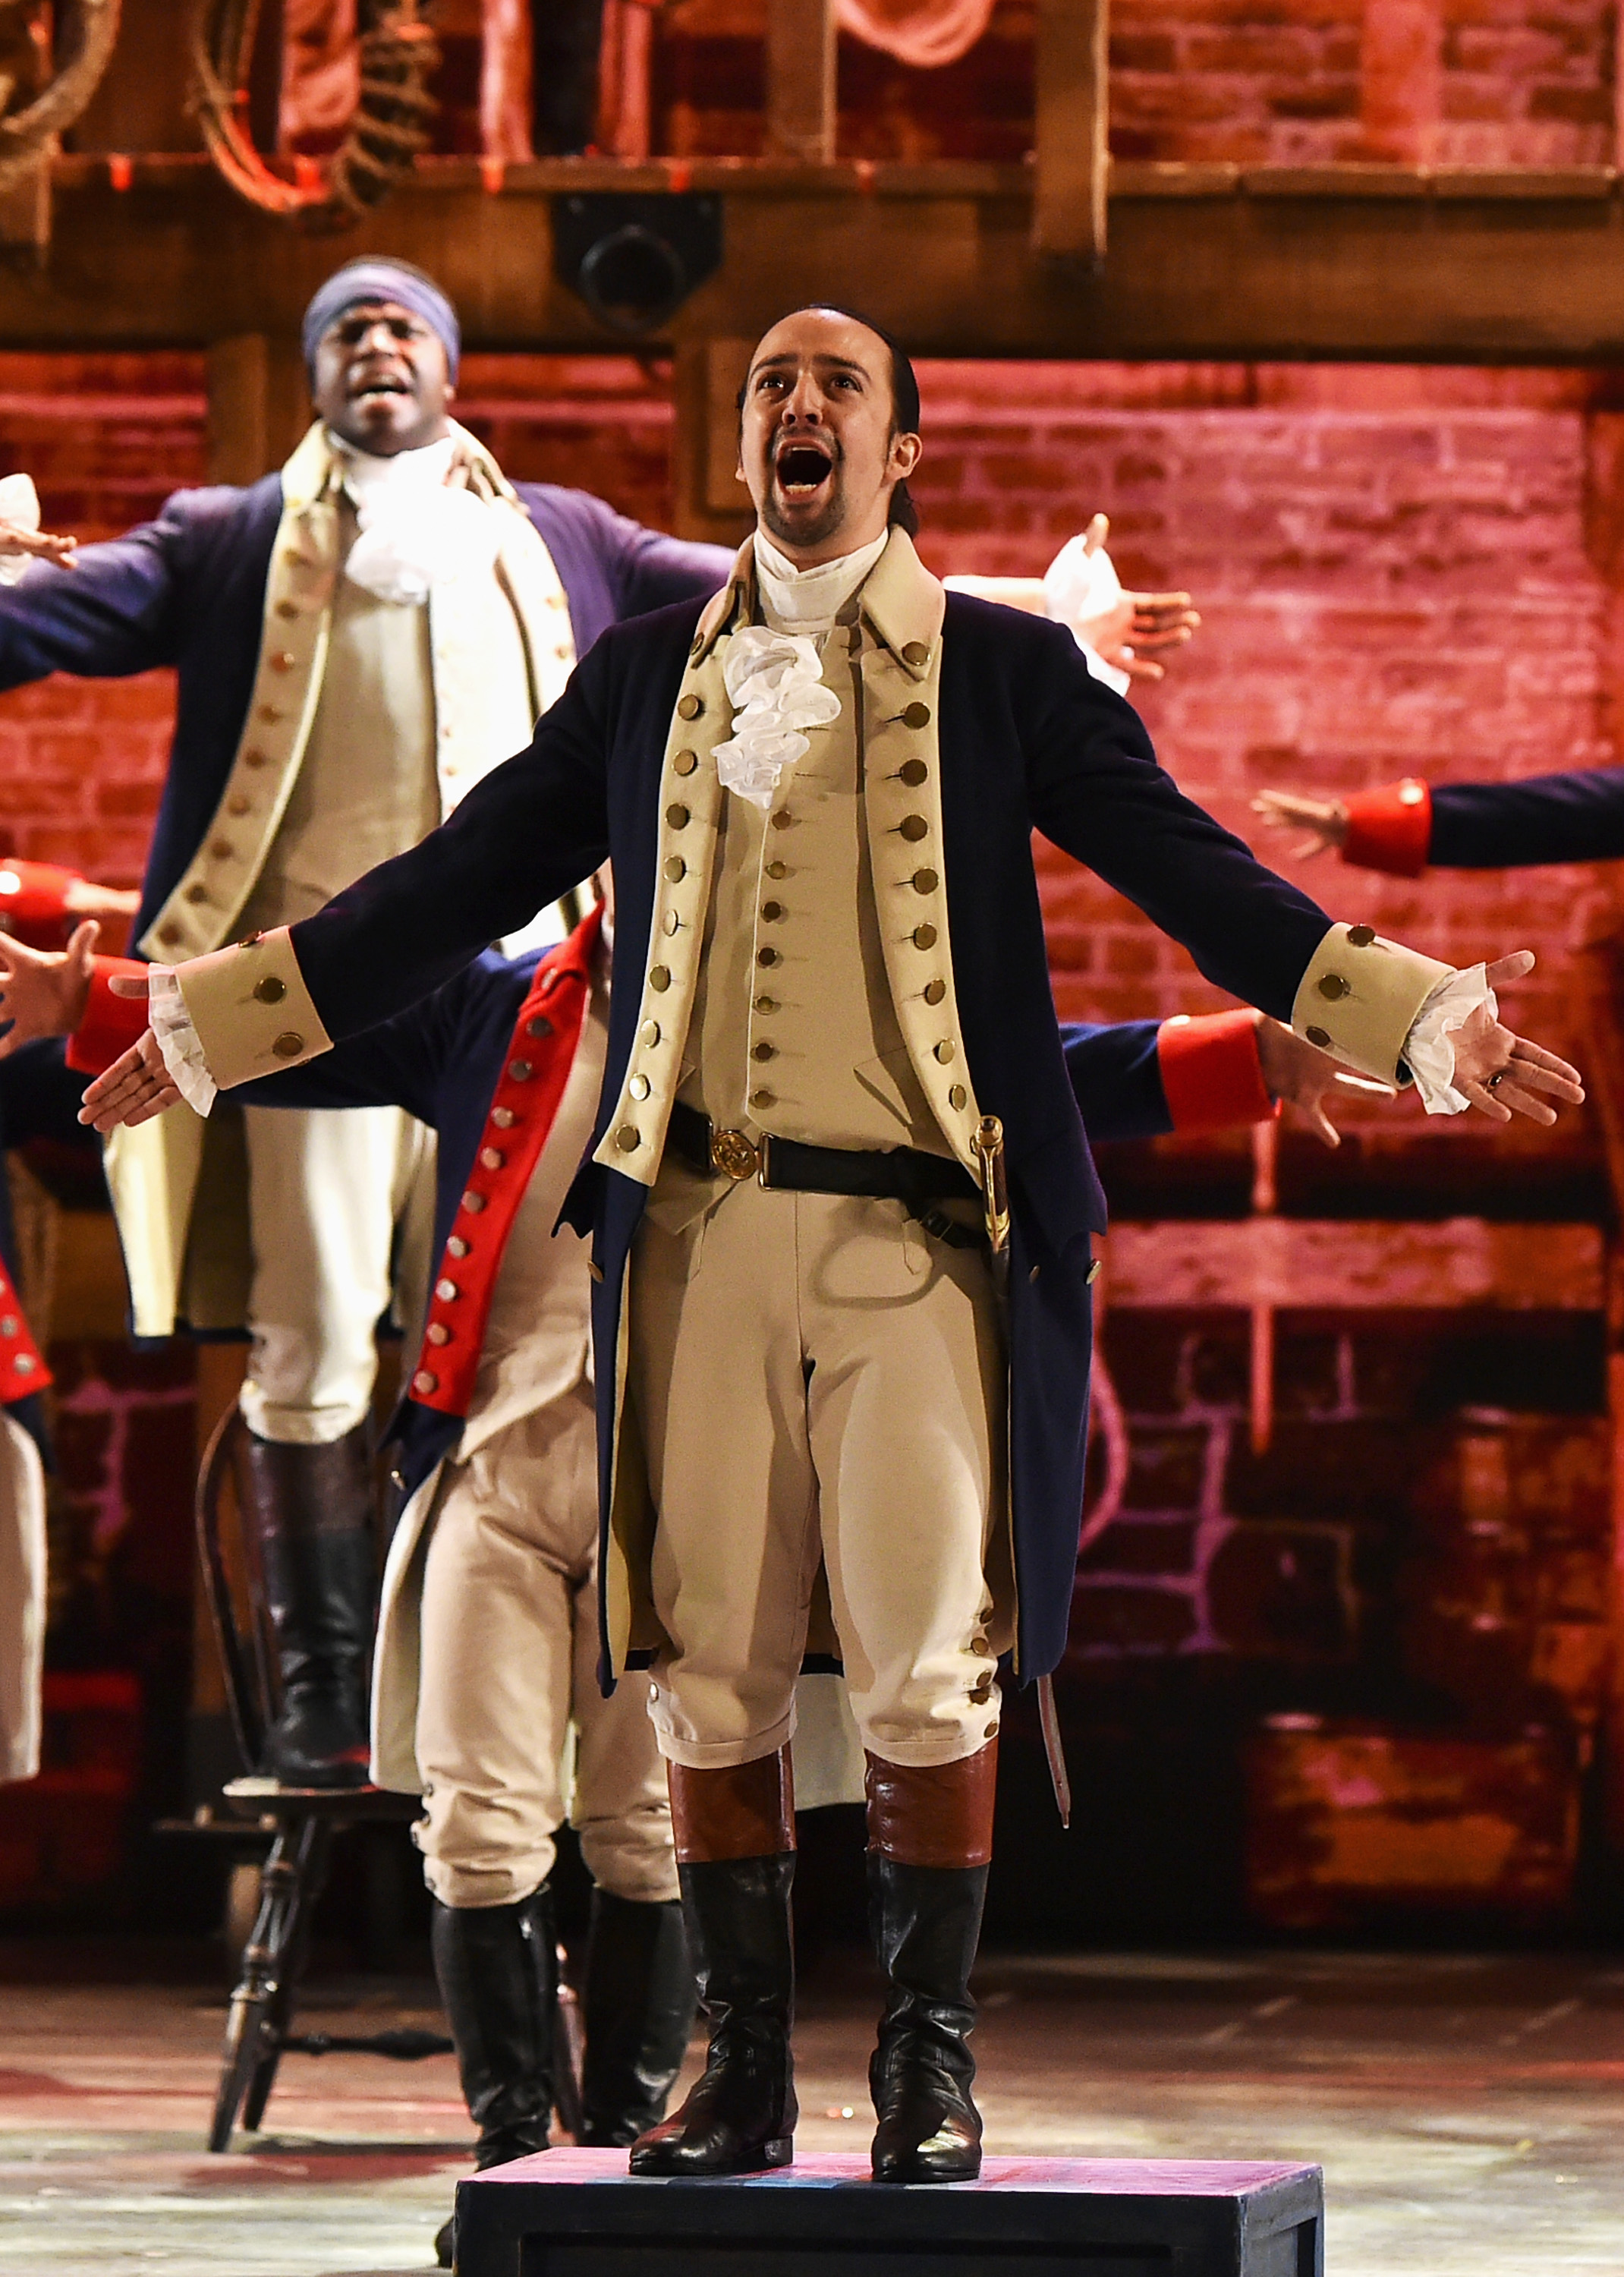 A 'Hamilton' Film With The Original Broadway Cast Is Coming To Tell His